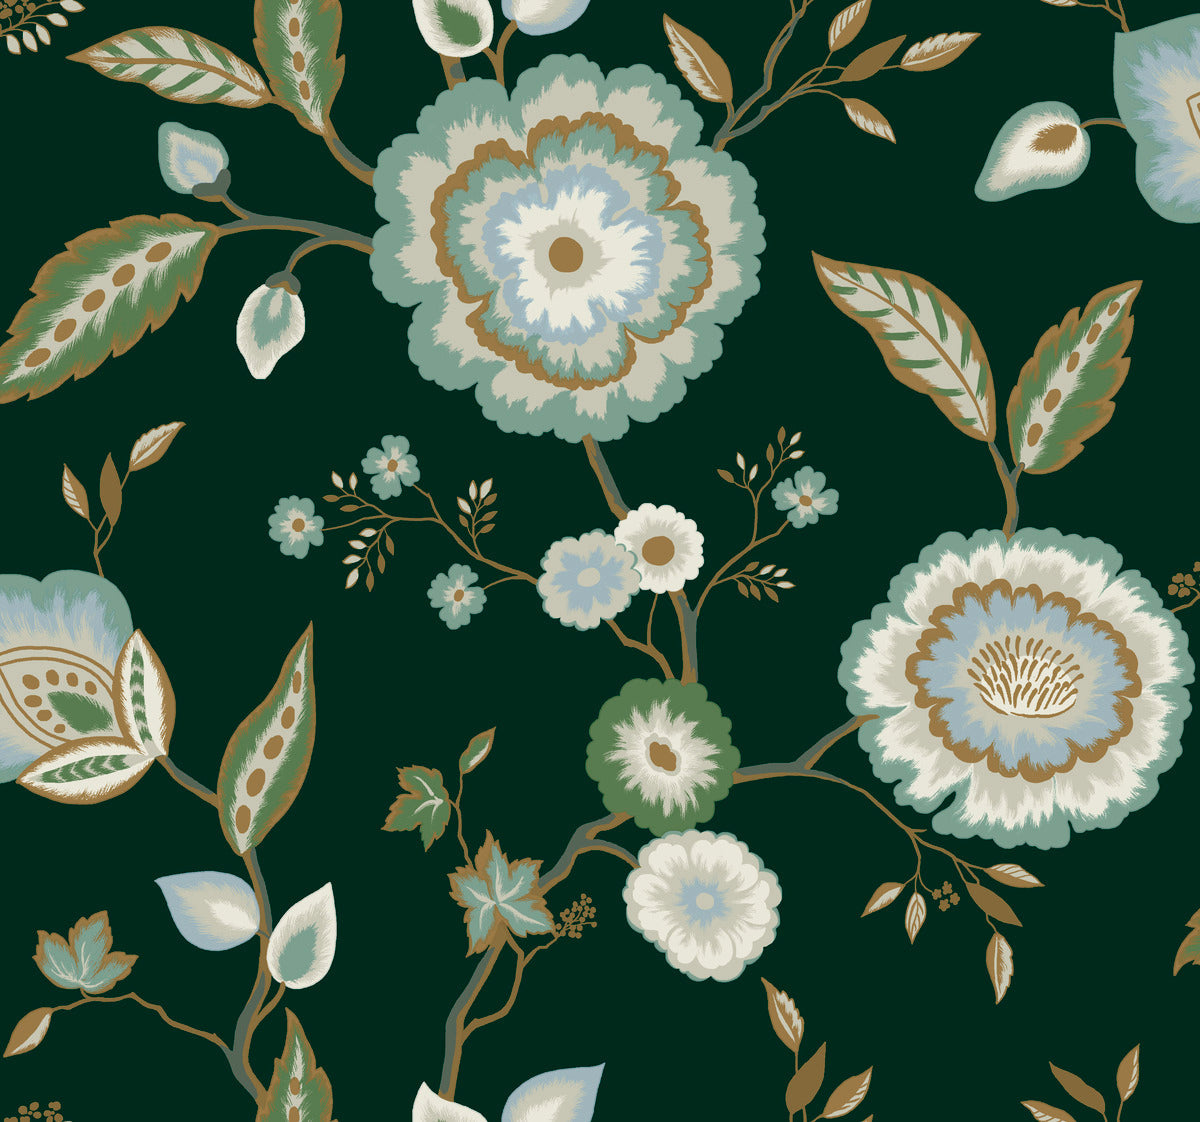 Seamless pattern featuring large, stylized dahlia blooms and leaves on a dark green background. The flowers have shades of white, blue, and green, while the leaves display similar tones with some brown accents. This Dahlia Blooms Midnight/Multi Wallpaper Black, Pink (60 Sq.Ft.) by York Wallcoverings is intricate, symmetrical, and exudes a vintage feel.